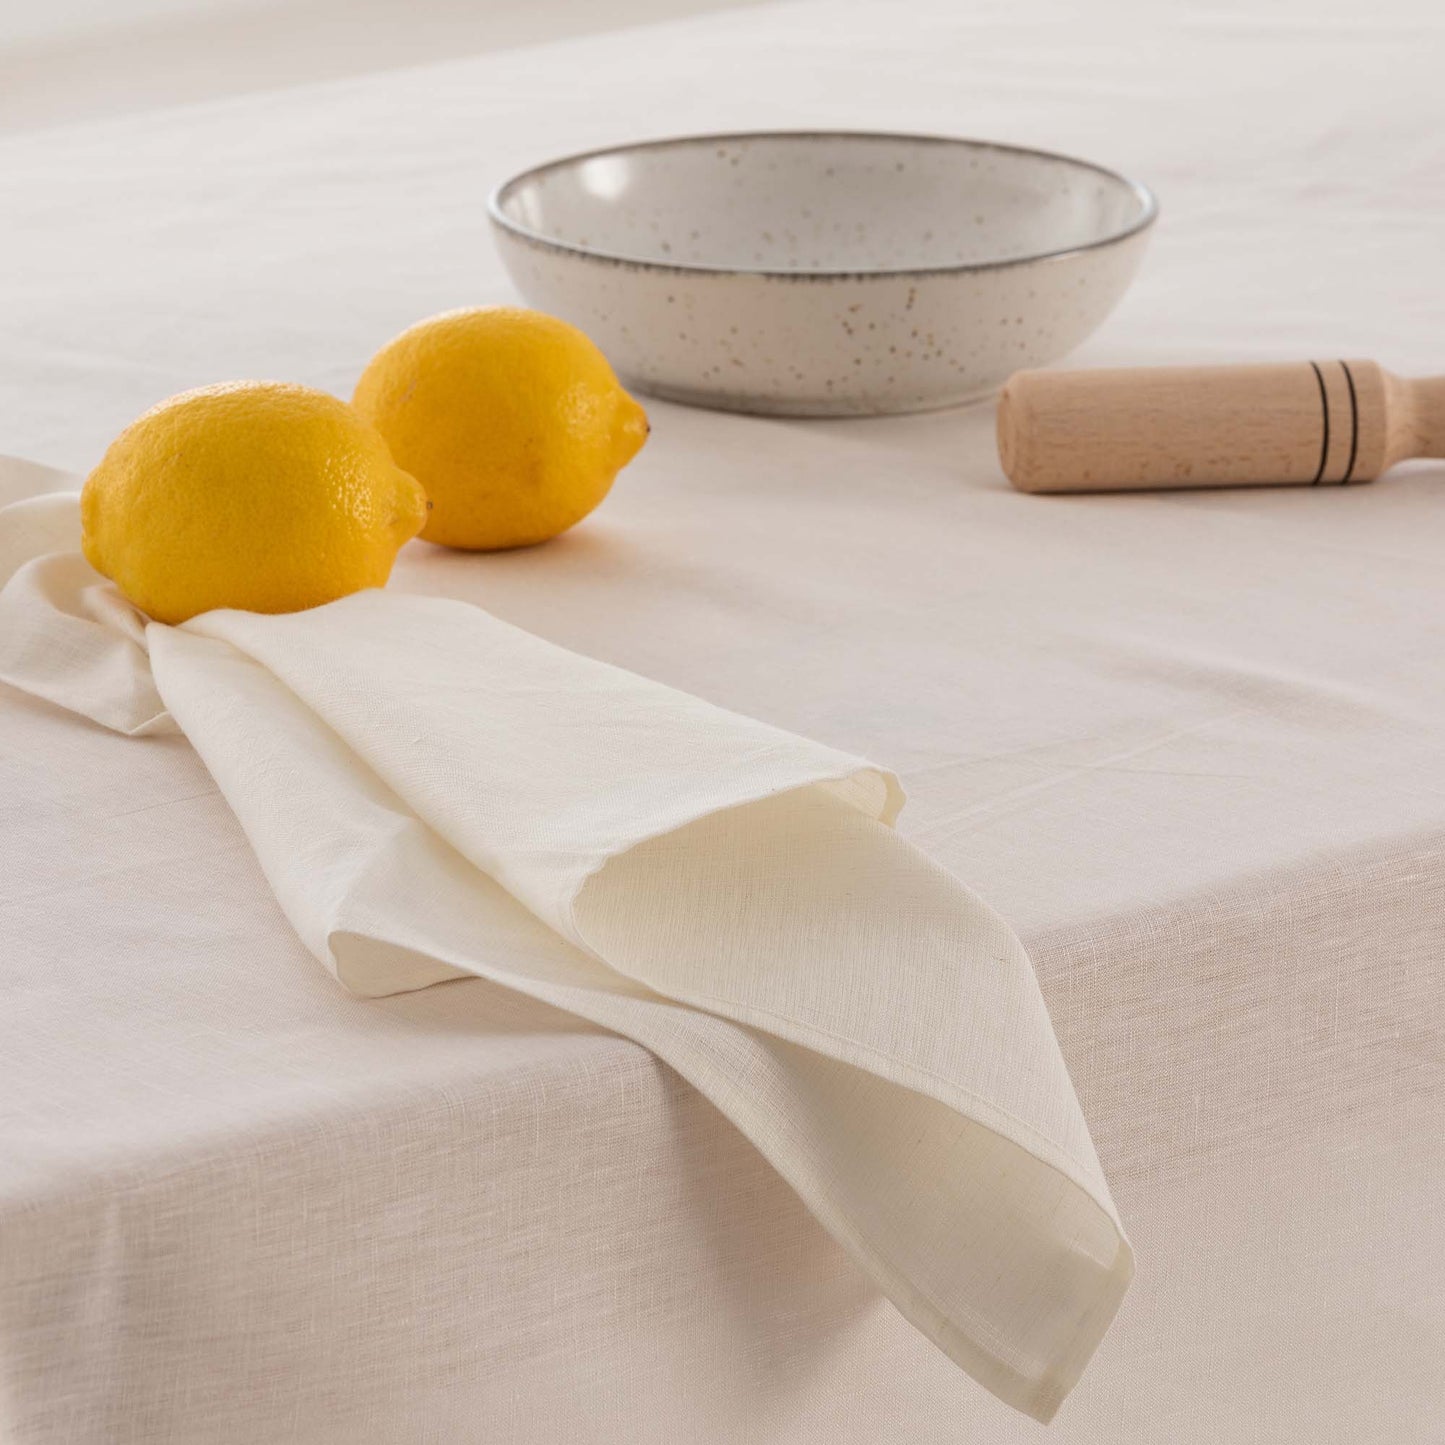 Waterproof stain-resistant tablecloth 100% Natural Linen